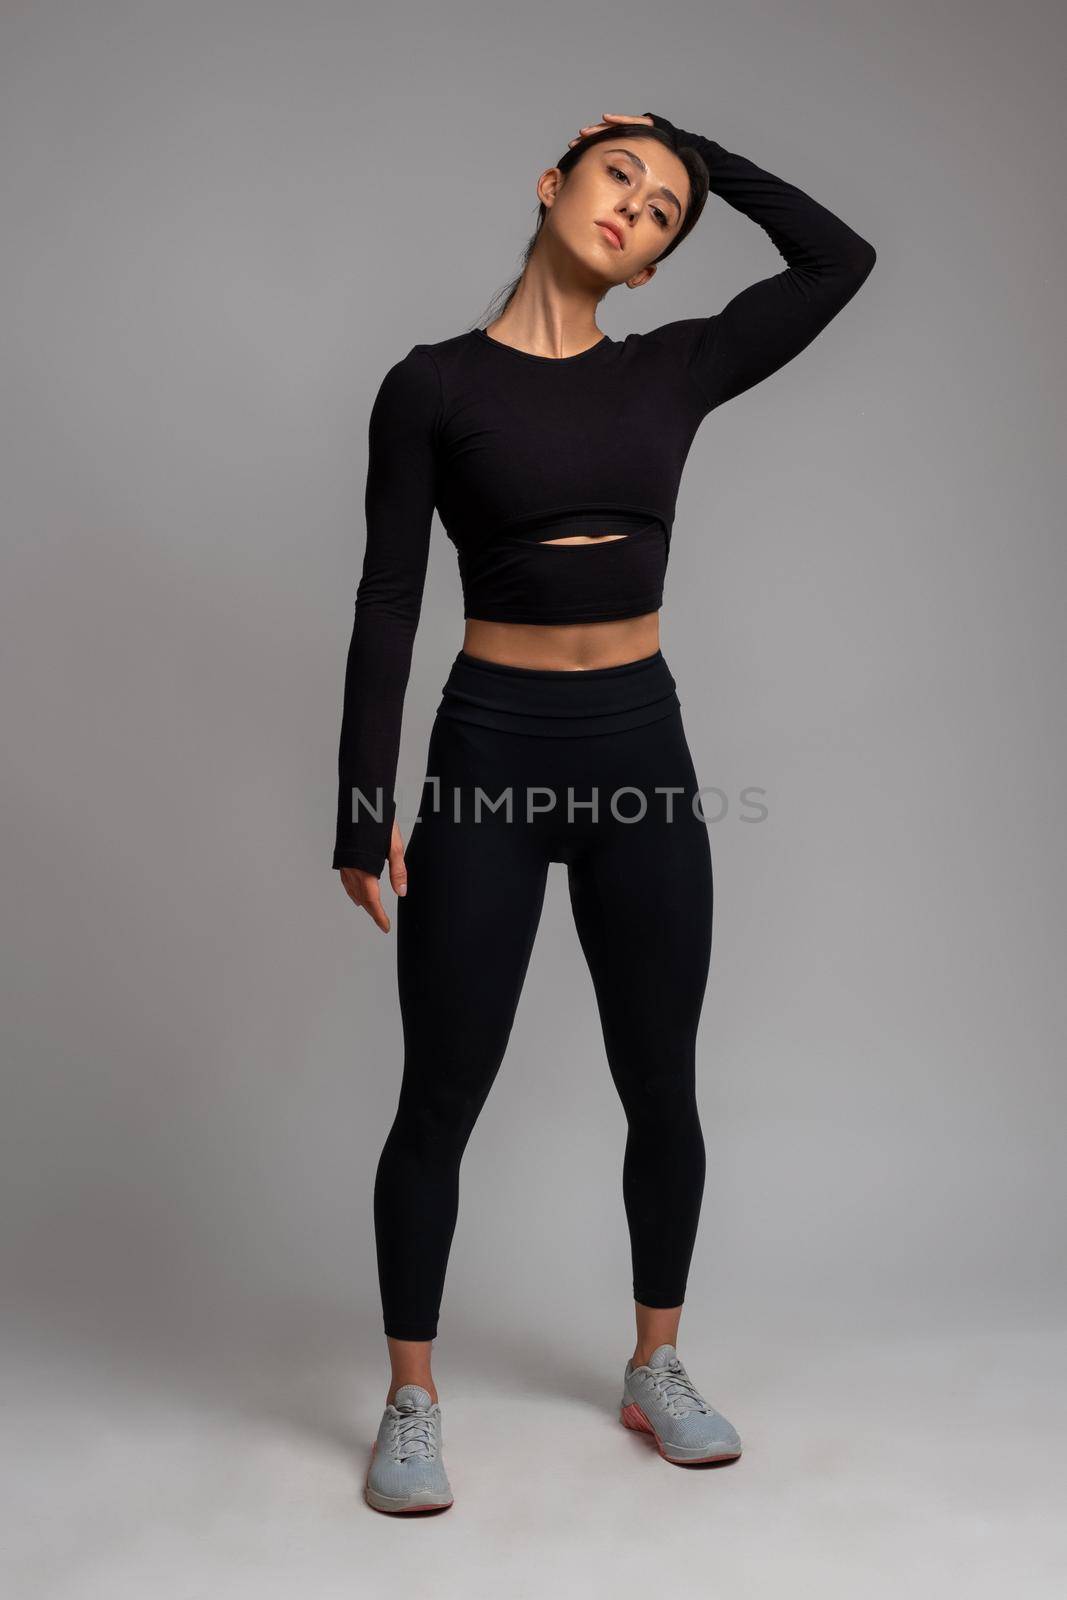 Confident young sportswoman warming up before intense workout, doing stretching exercises. Full length studio portrait on grey background